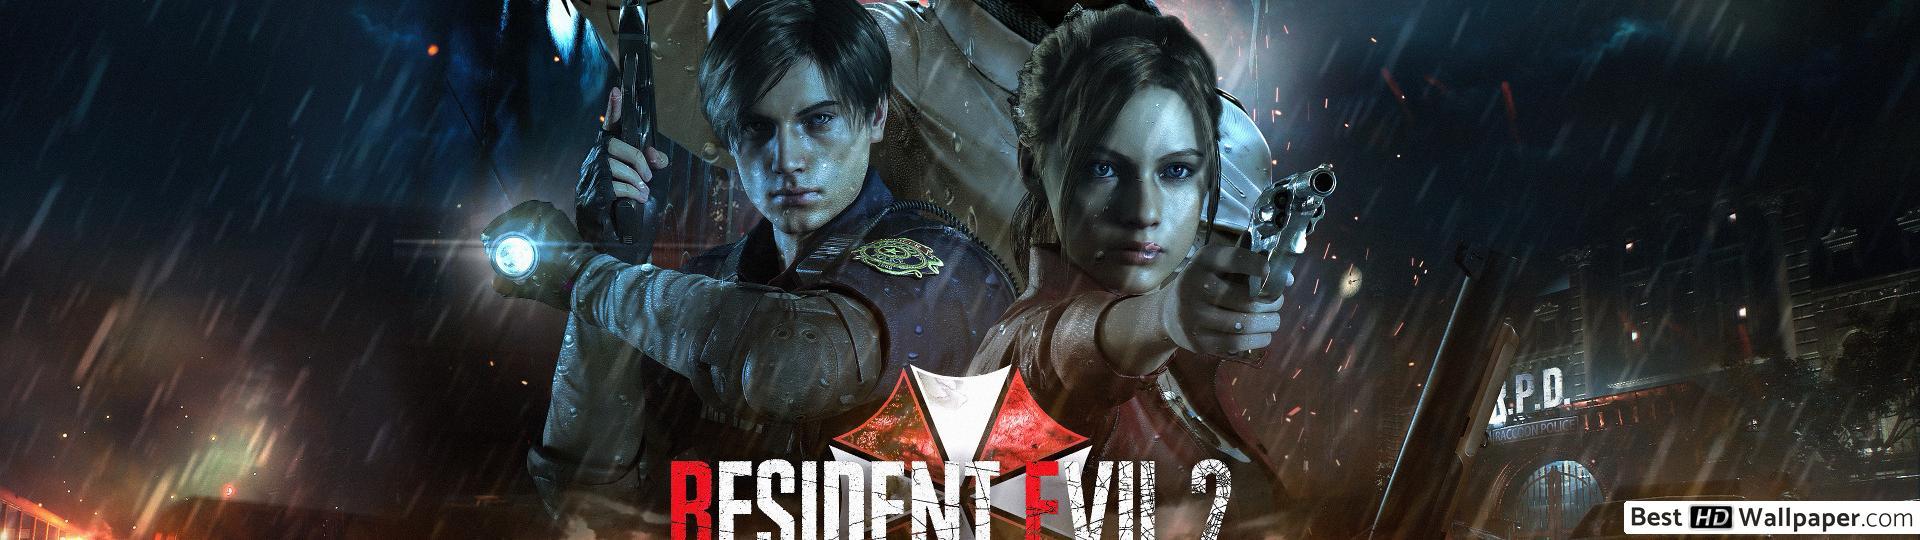 Resident Evil 2 Remake S Kennedy, Ada Wong & Claire Redfield